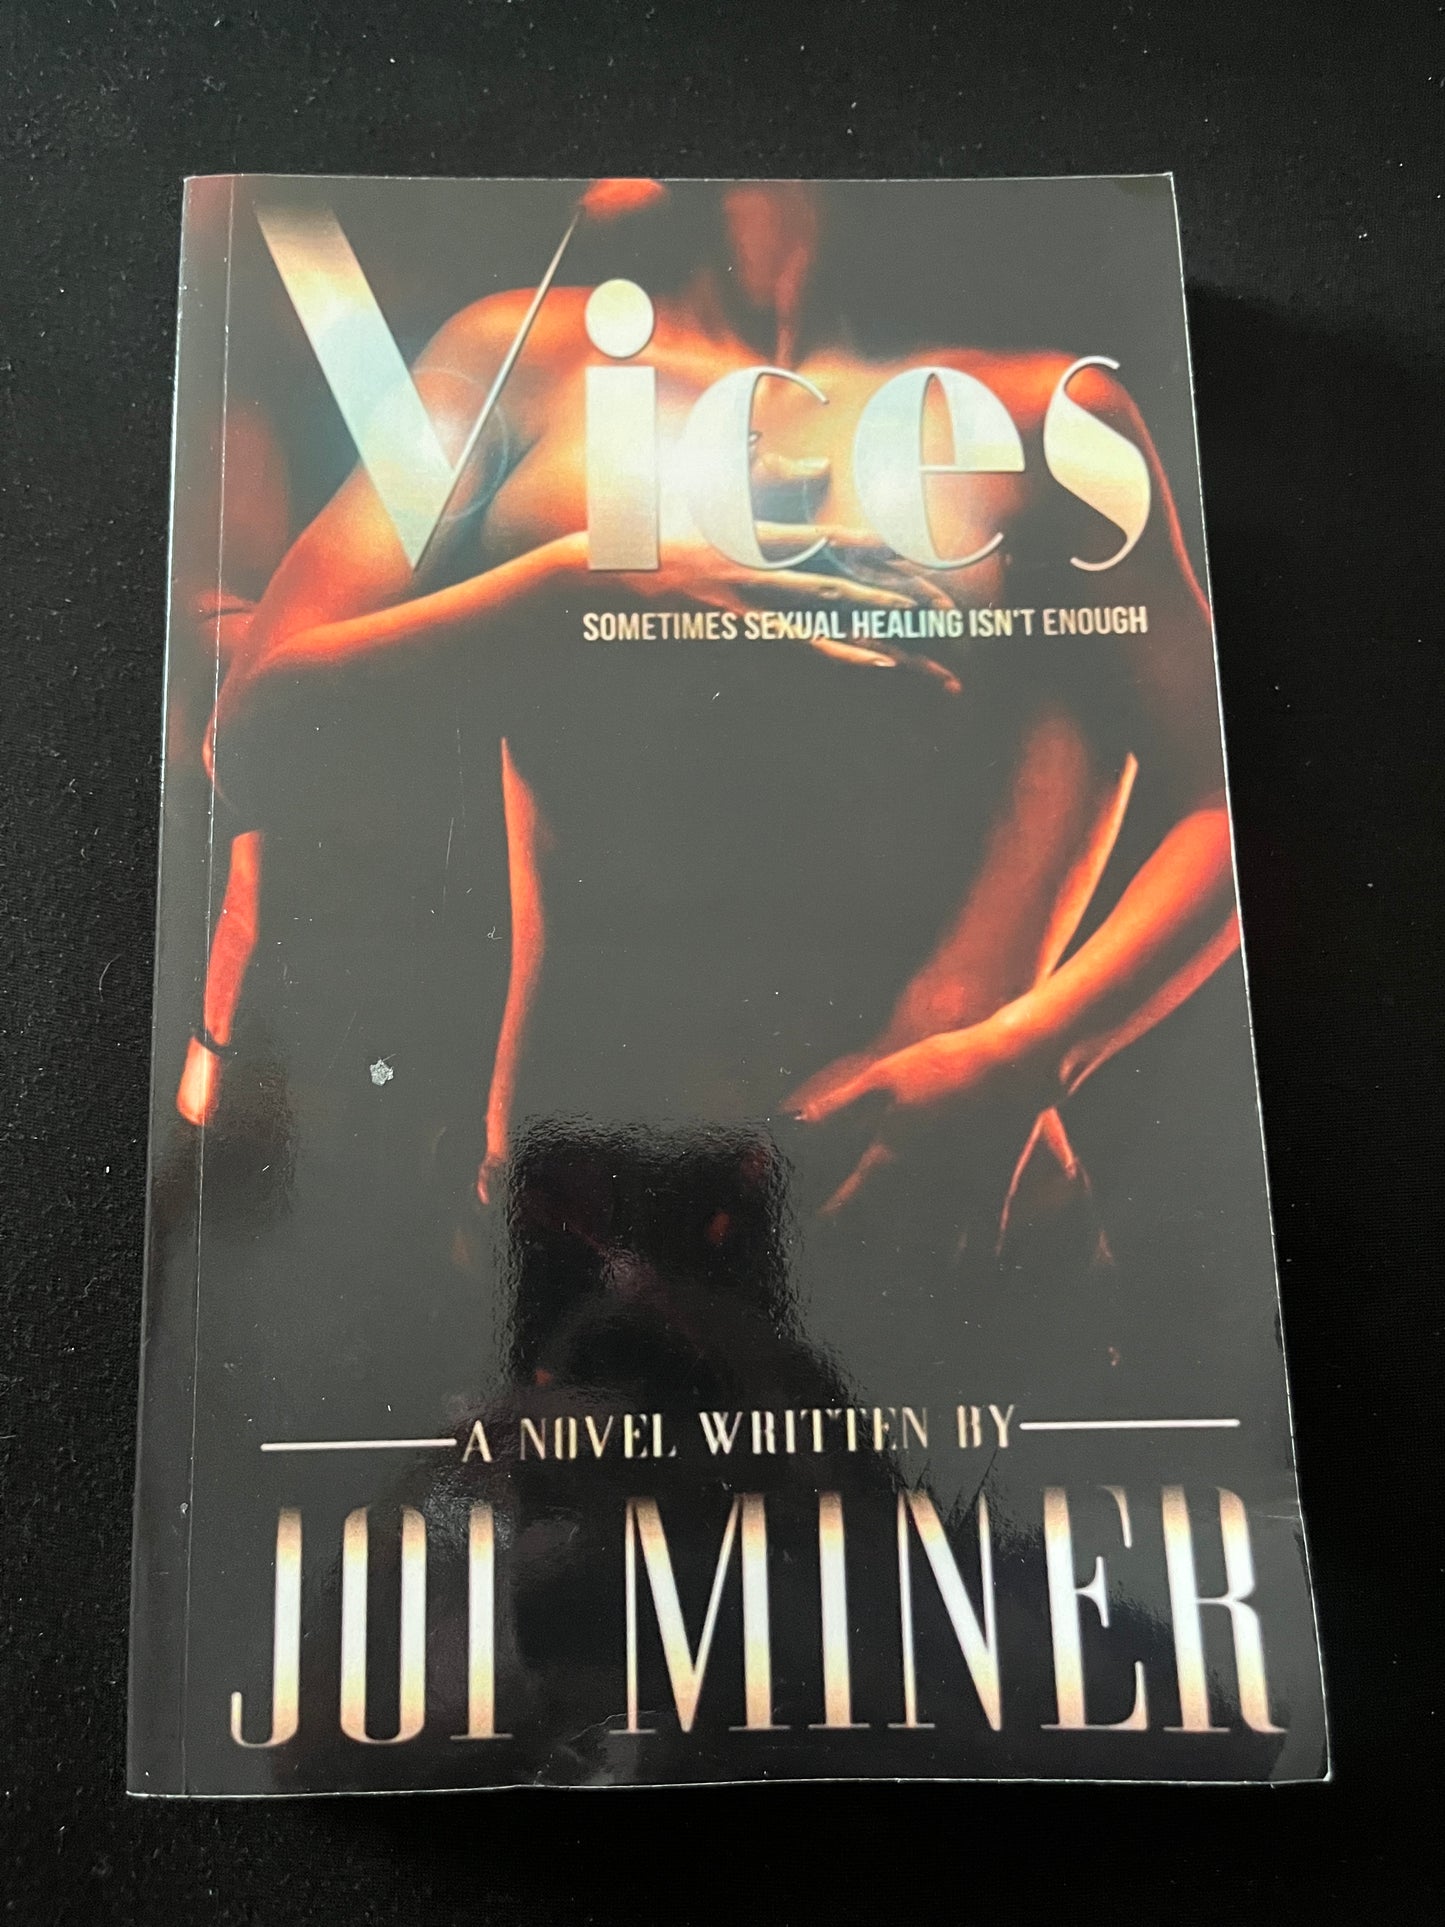 VICES by Joi Miner